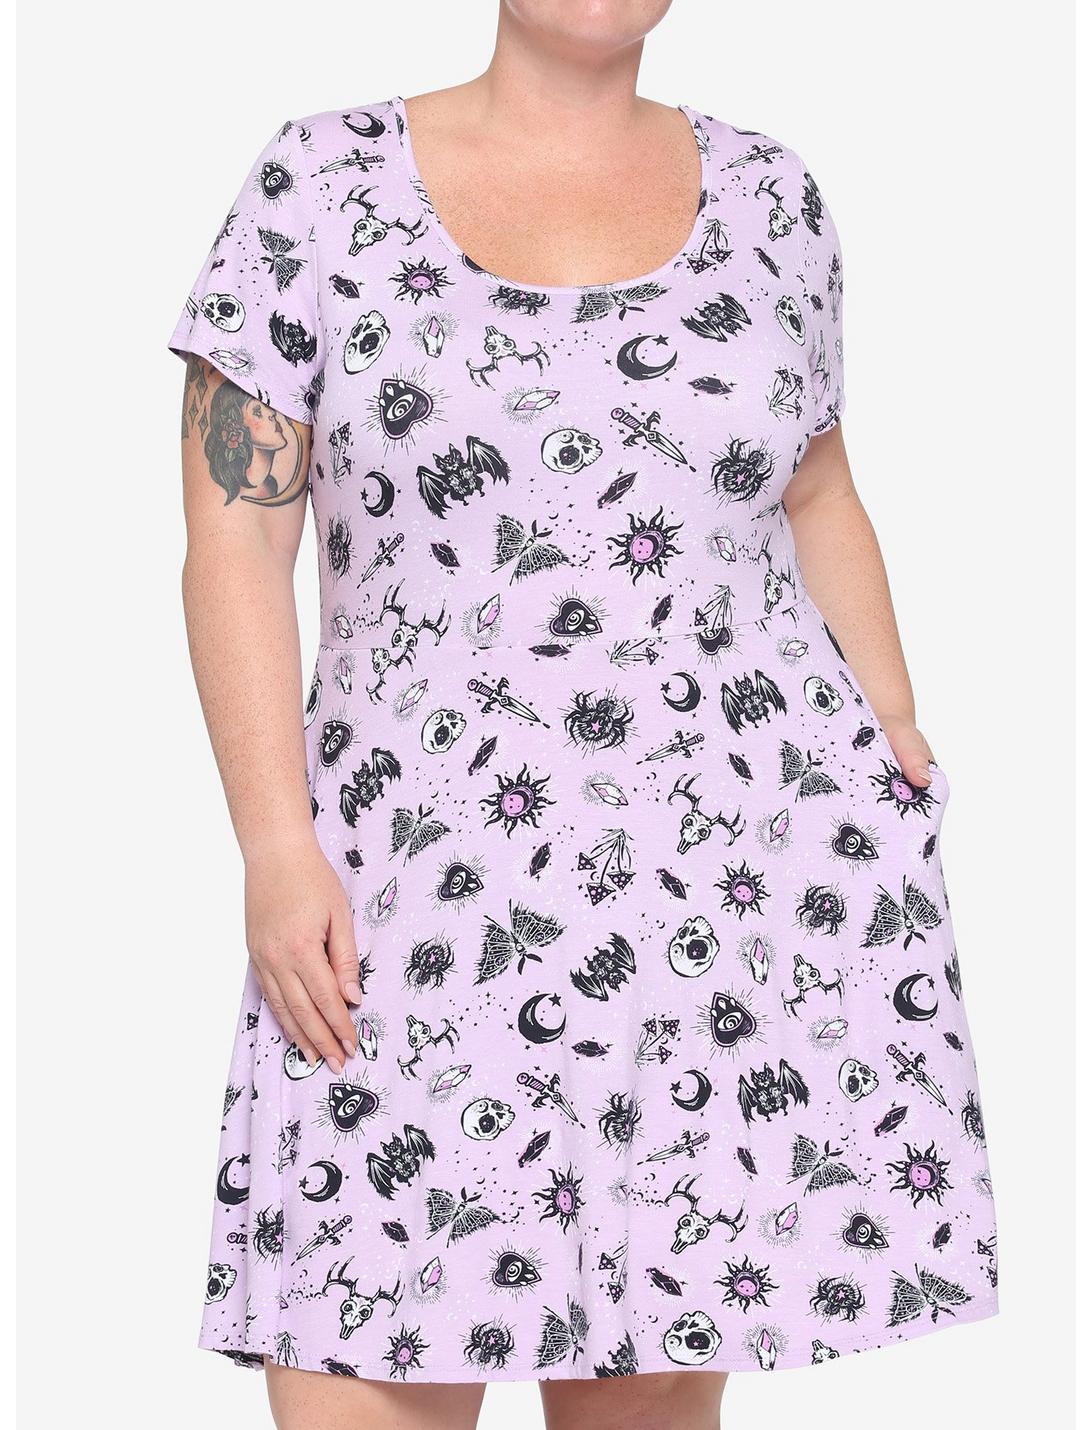 Lavender Witchy Sketch Icons Dress Plus Size, PINK, hi-res